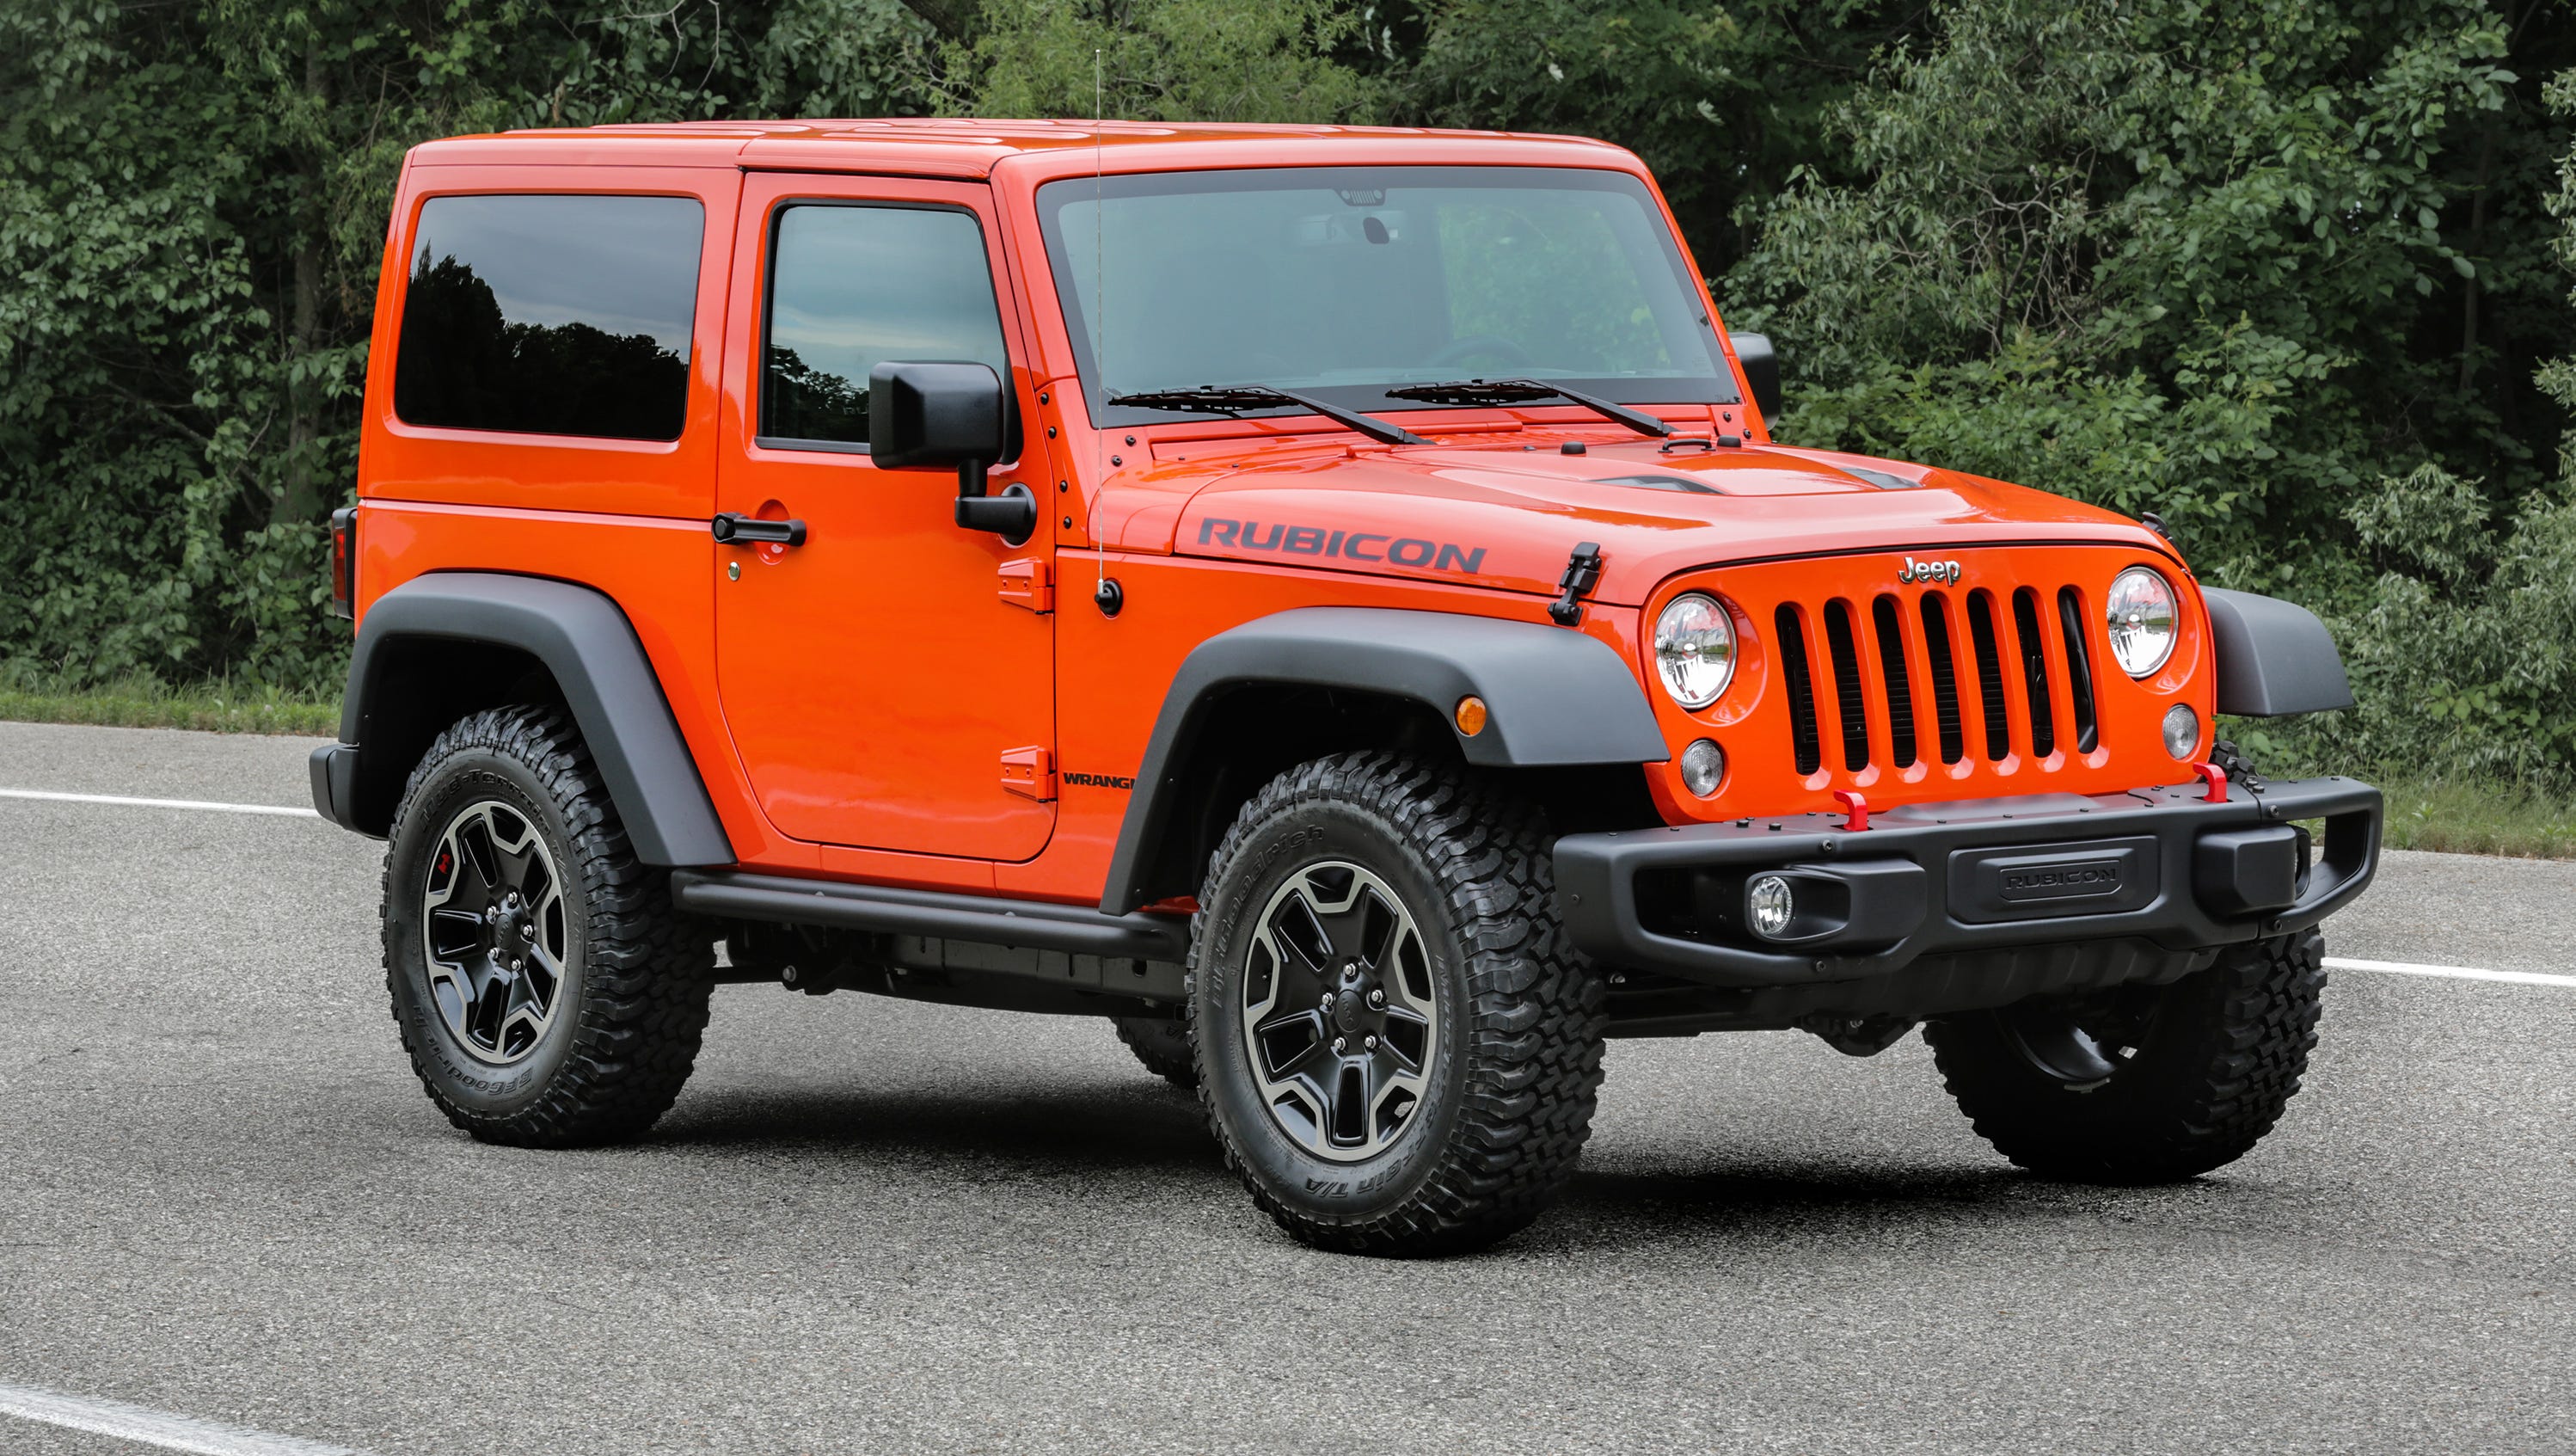 Jeep Wrangler production could top 450,000 annually